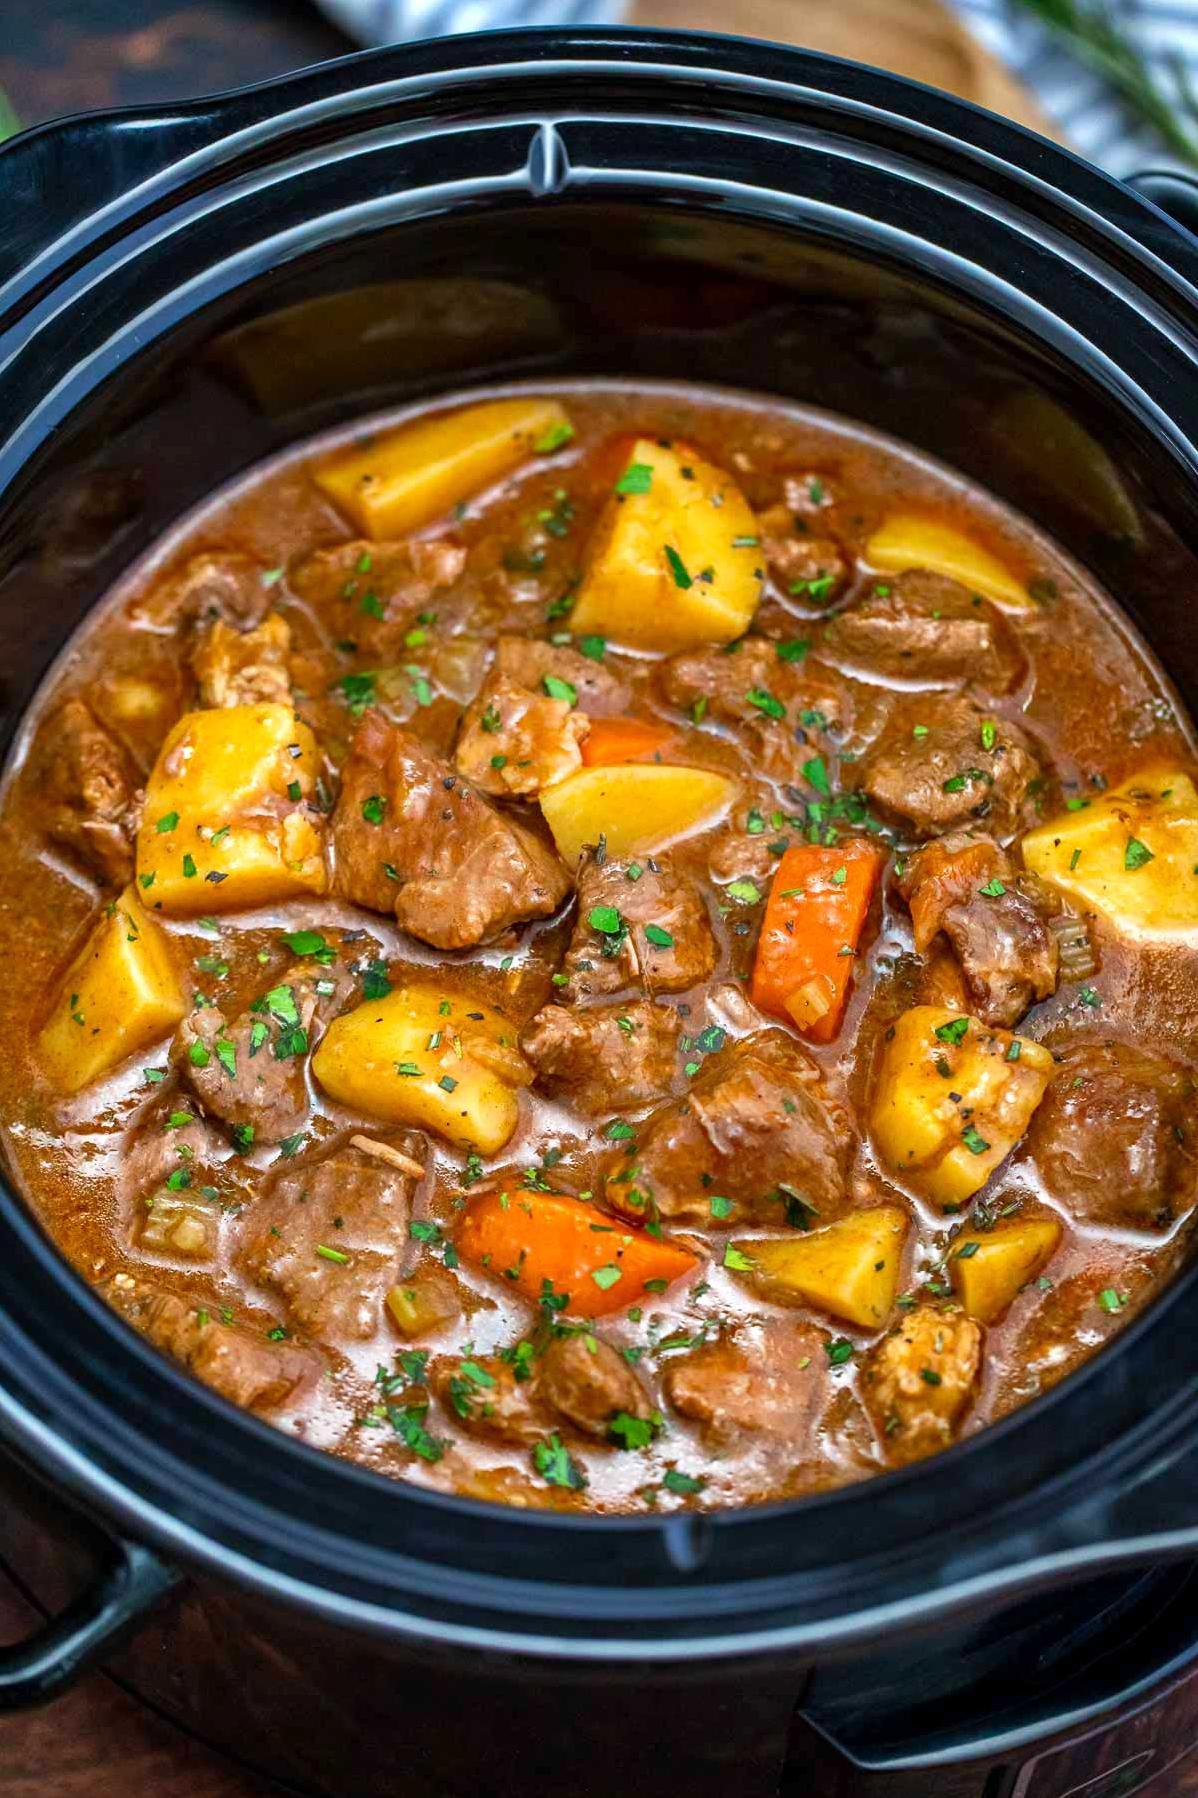  The slow cooker makes it easy to achieve a perfectly thick and rich gravy that coats every bite.